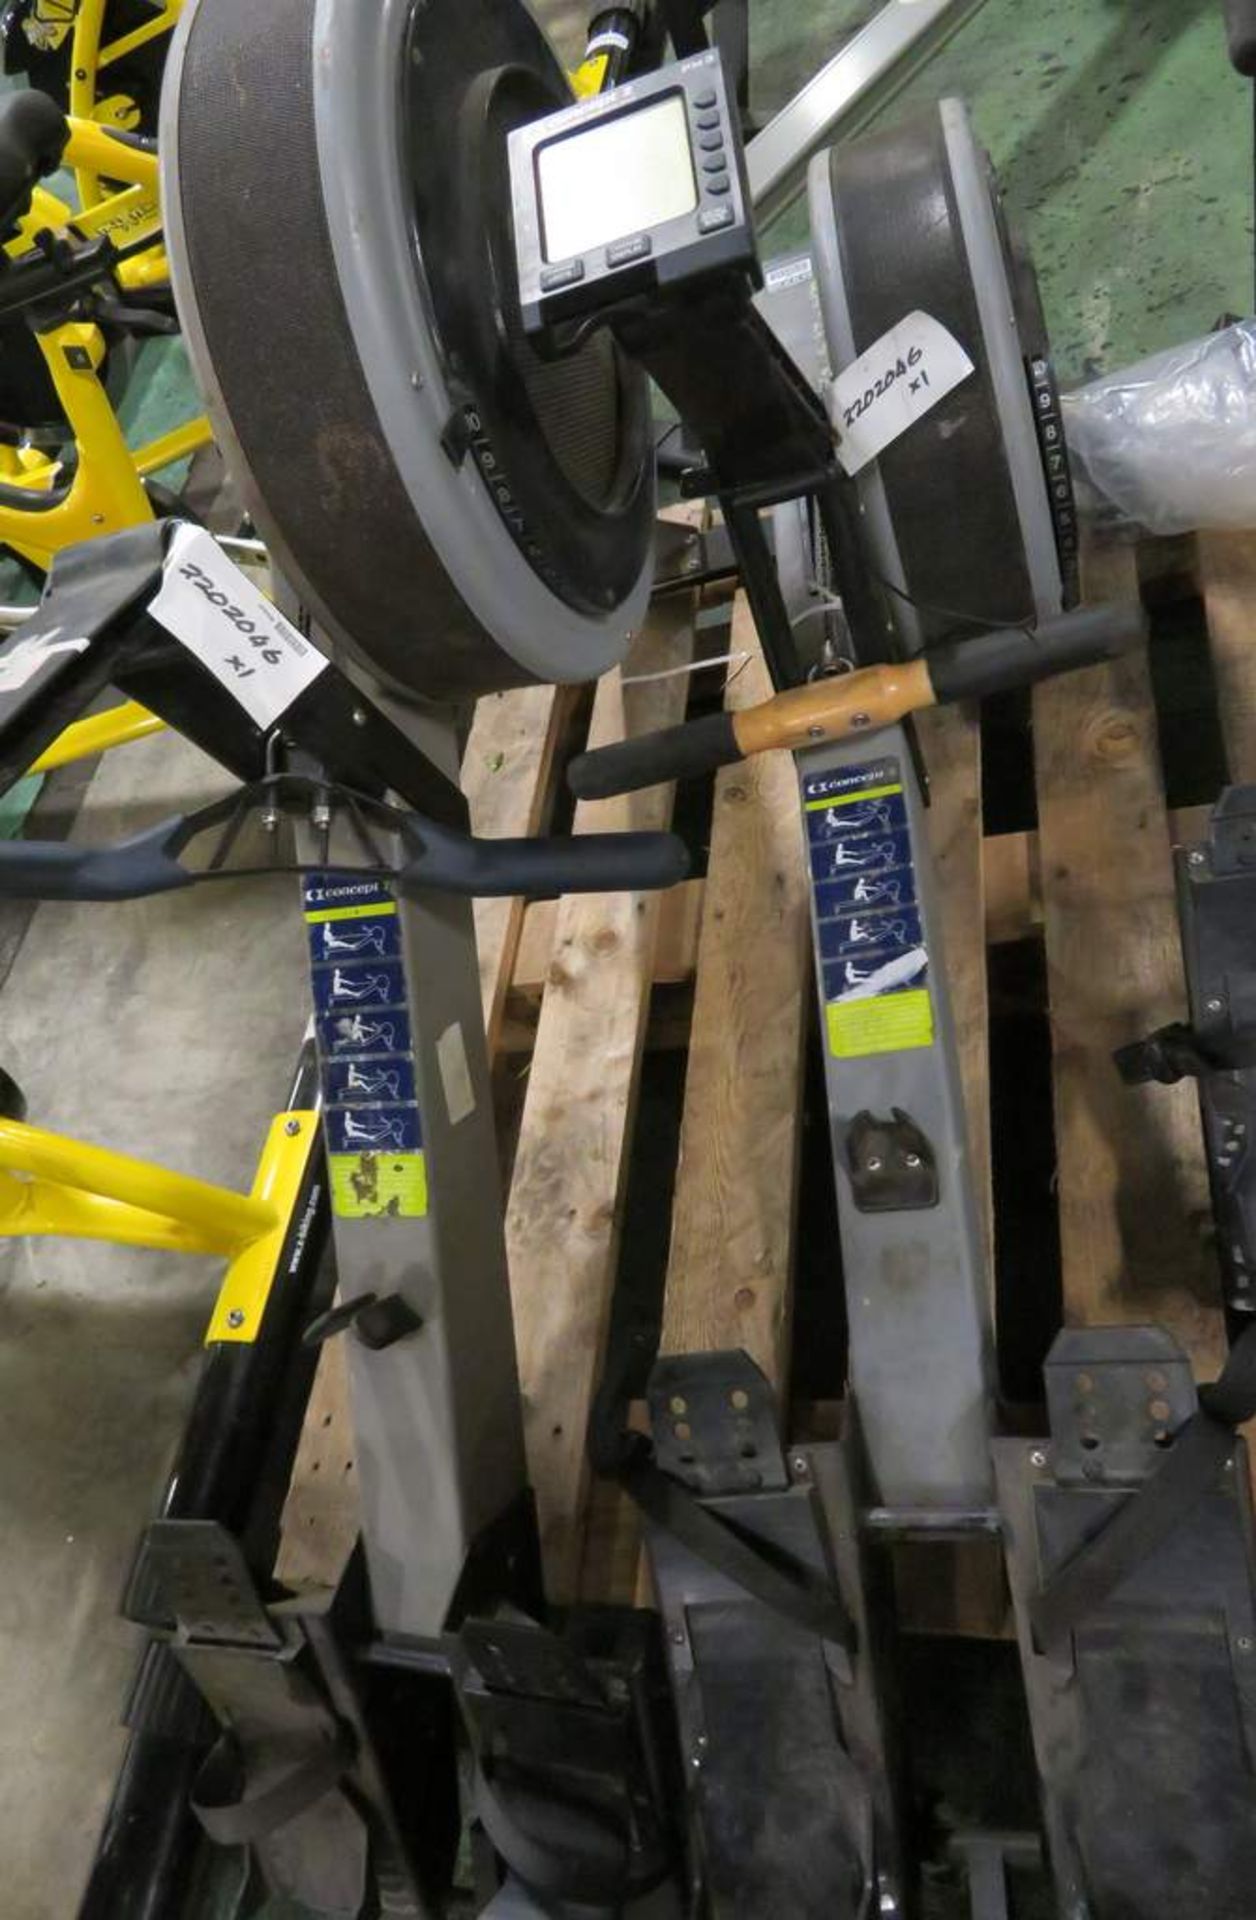 3x Concept 2 Indoor Rowing Machines As Spares. - Image 7 of 10